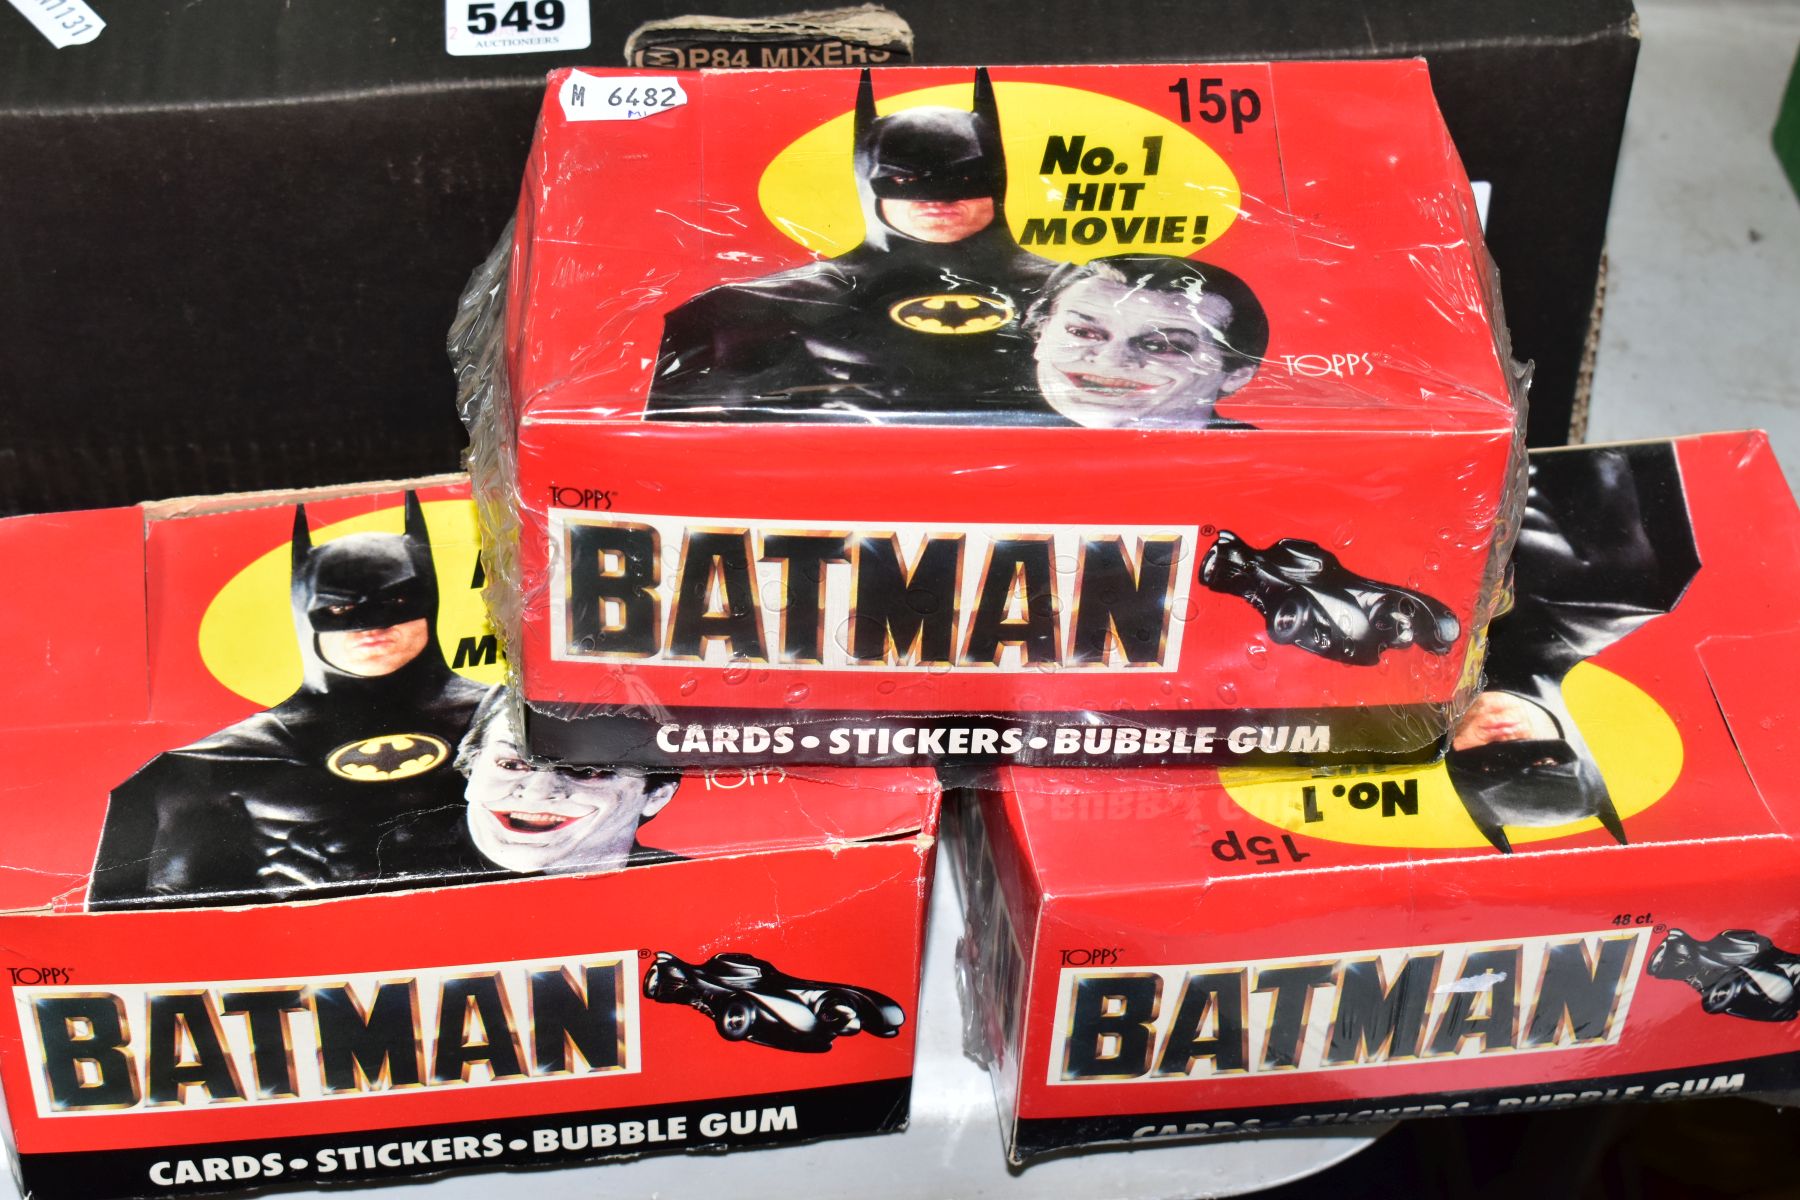 THREE BOXES OF TOPPS BATMAN THE MOVIE CARDS FROM 1989, two are unopened and still factory sealed